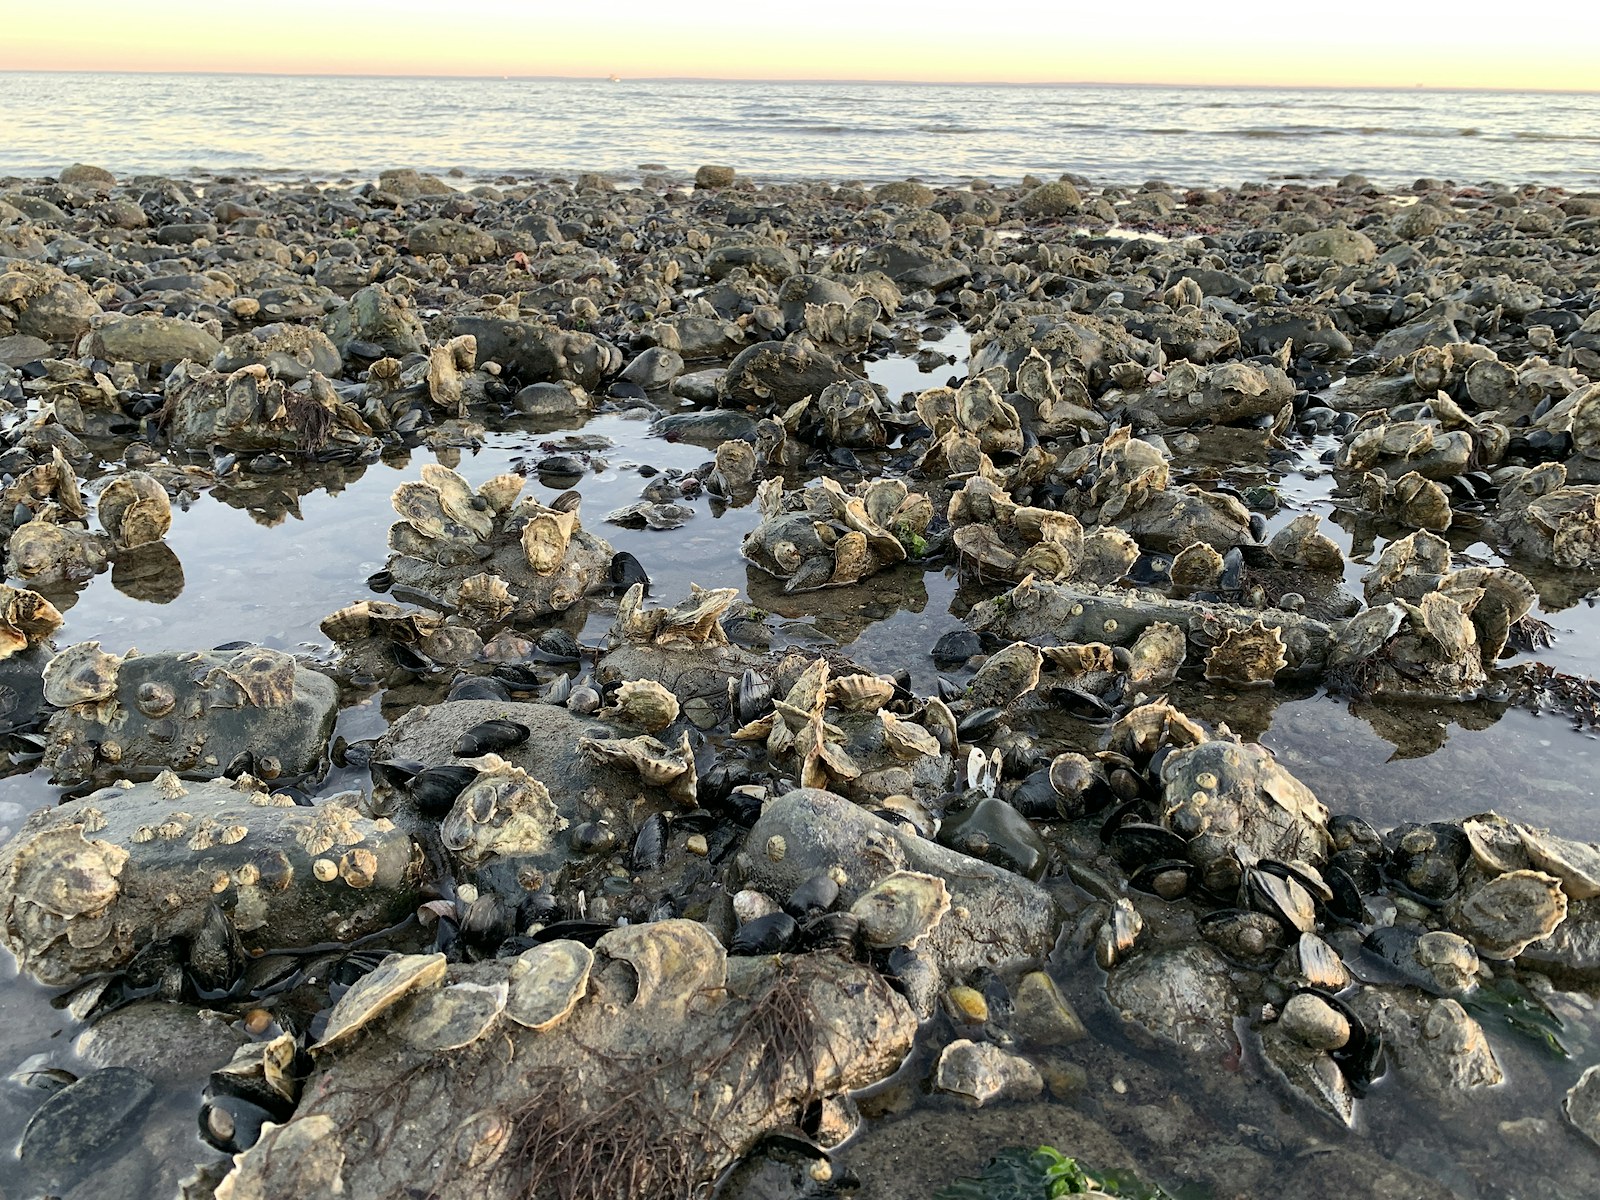 Live oysters on a rocky beach